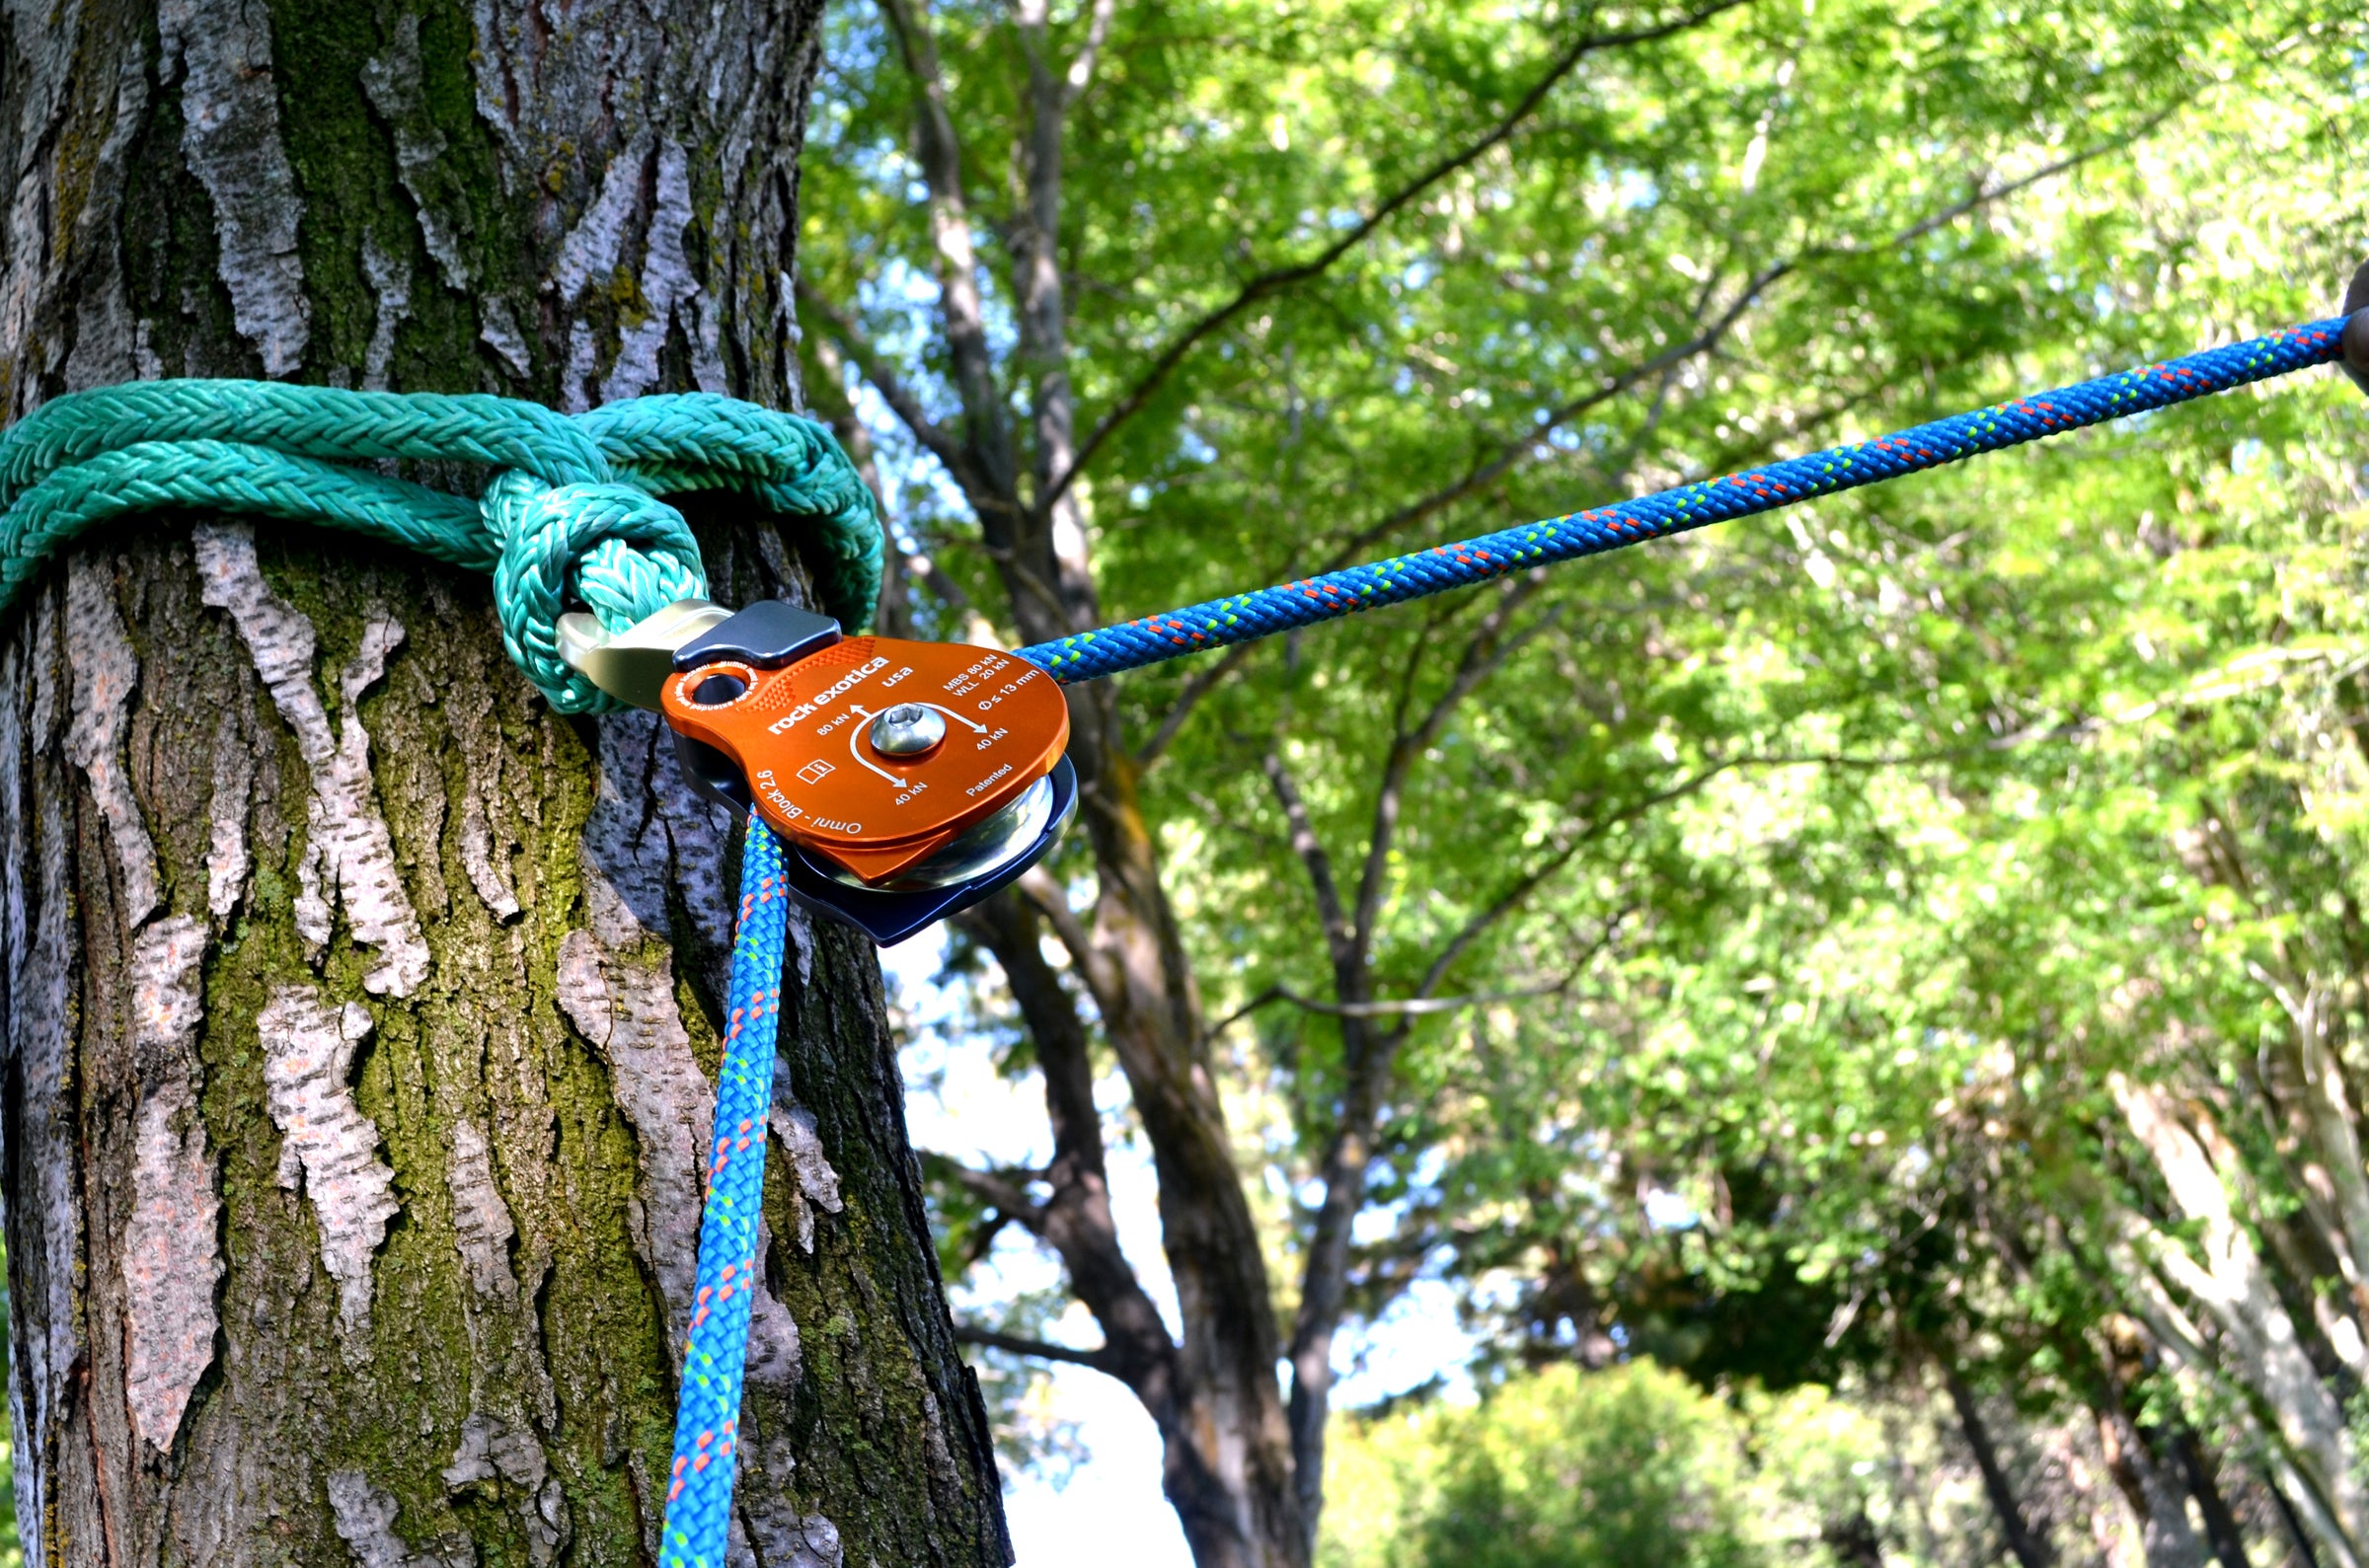 Fully Stocked Professional Arborist & Climbing Gear Store Since